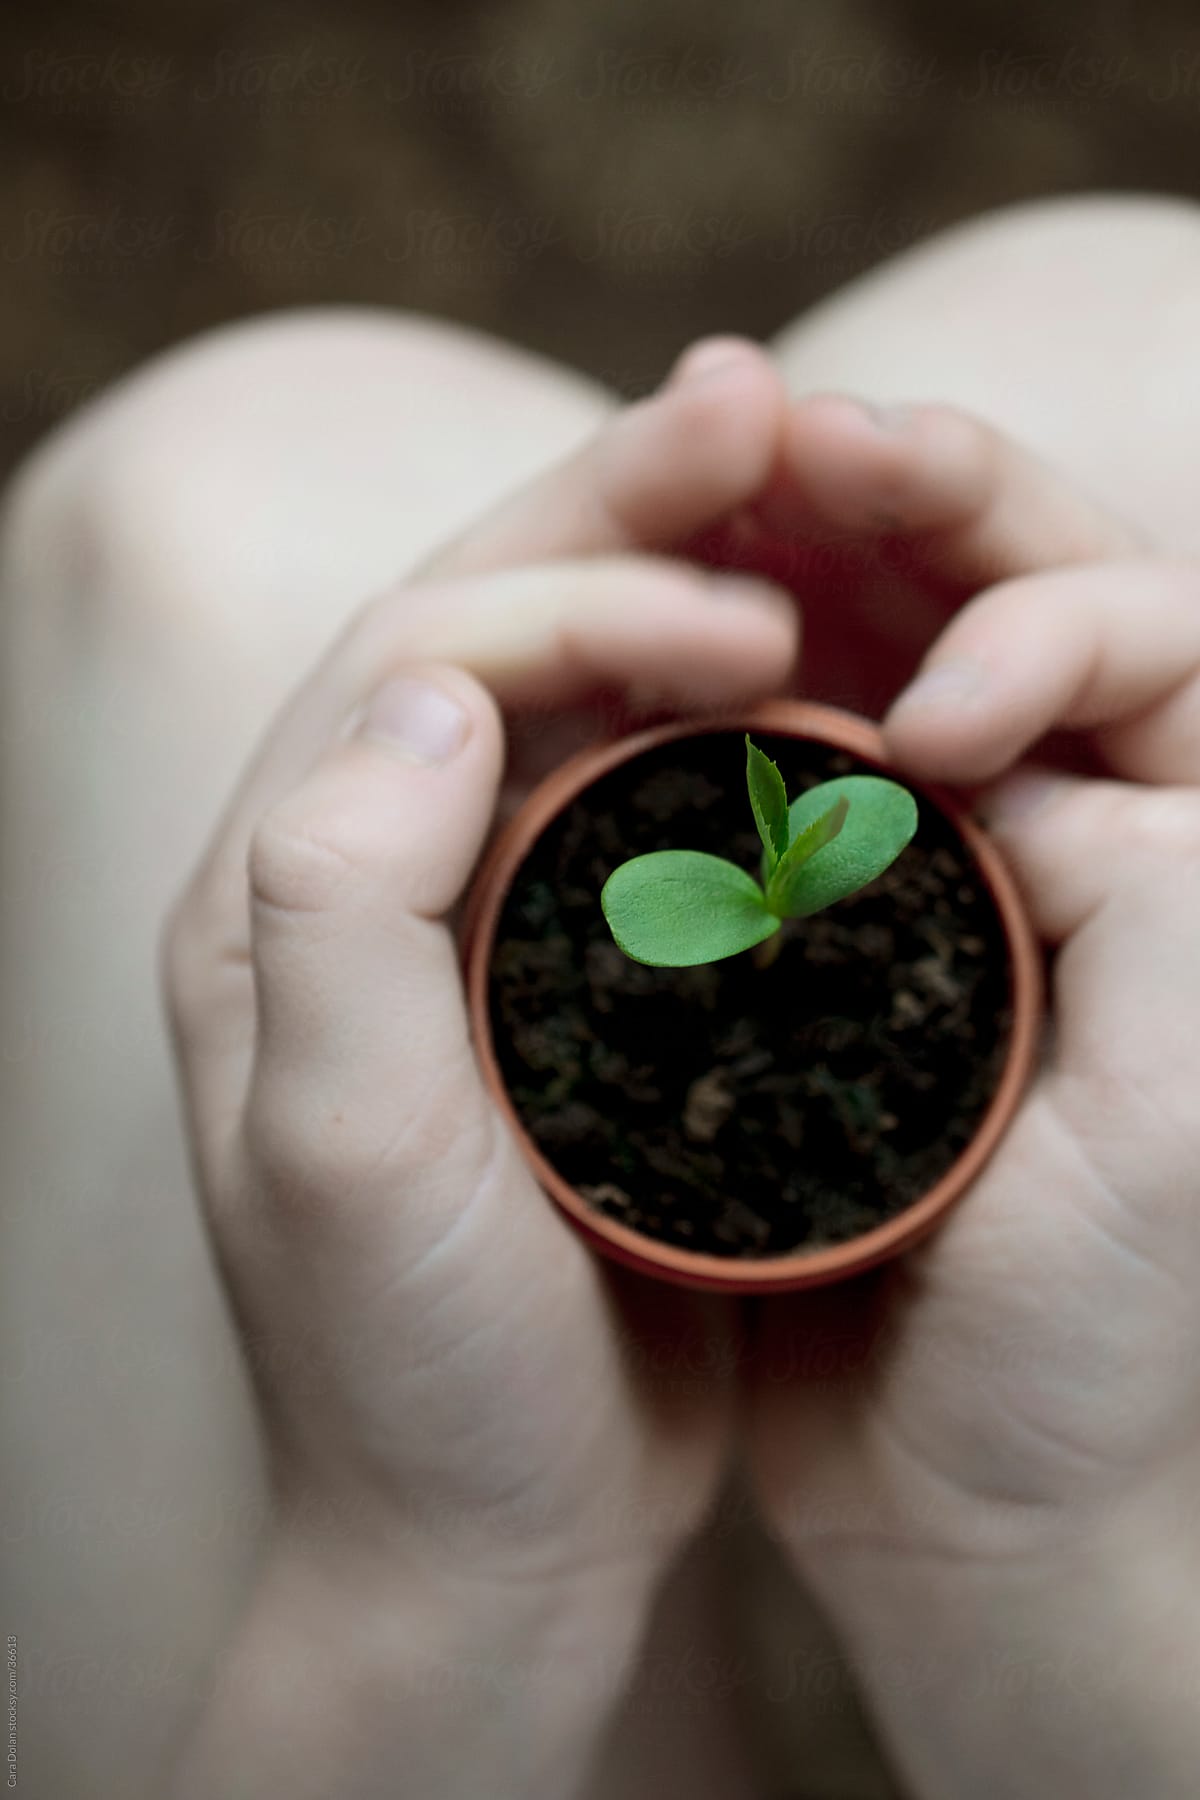 Child's hands protect new green seedling